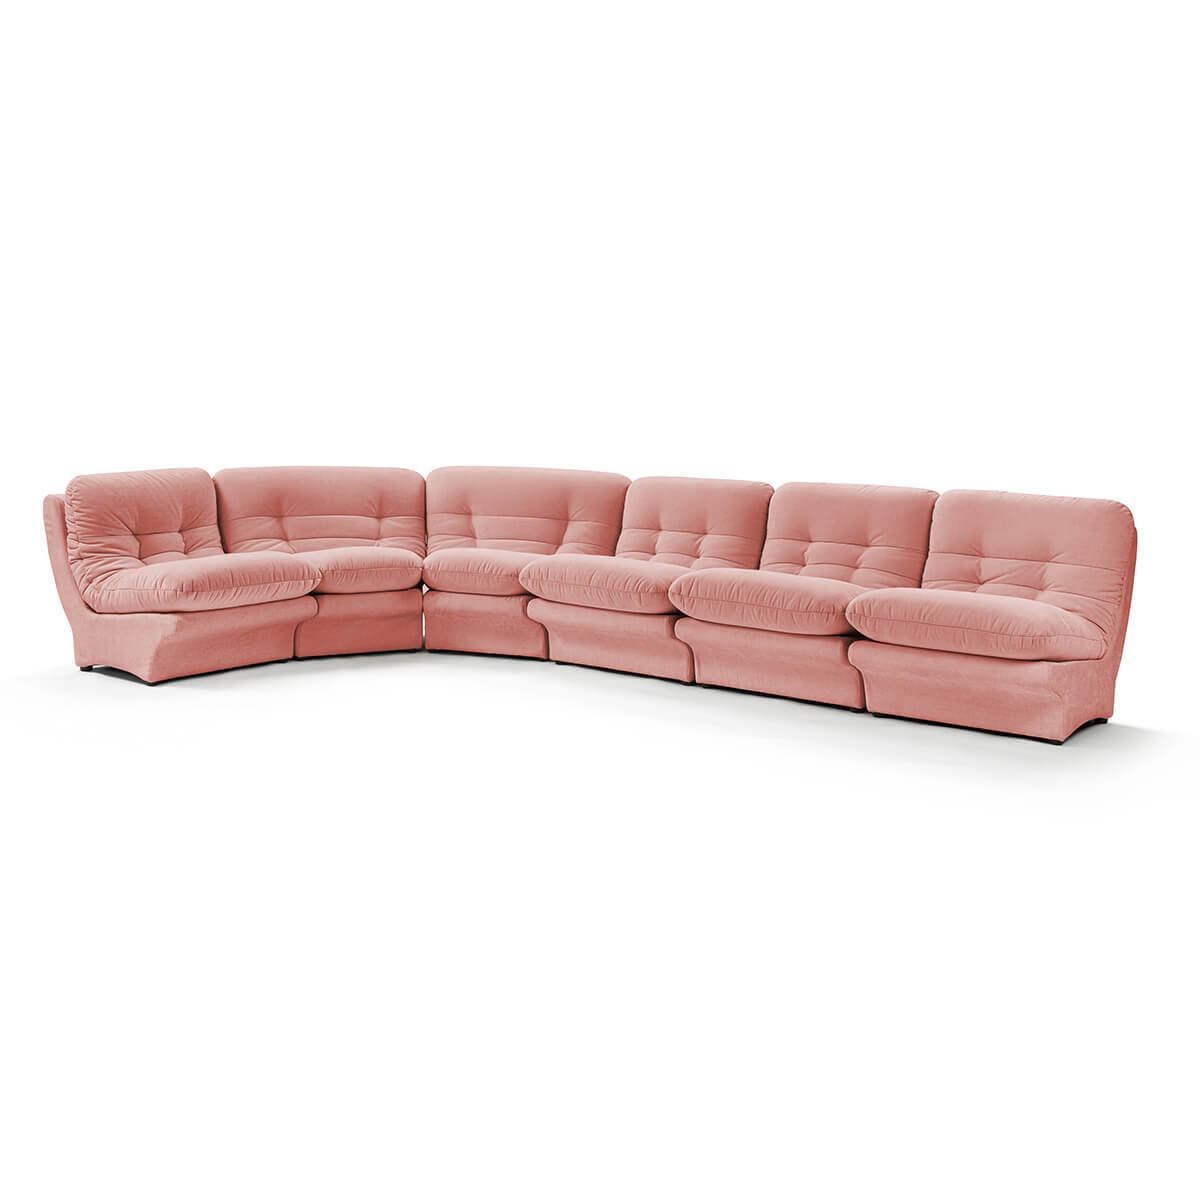 Carsons Mid Century Curved Modular Sectional Sofa / Combination 003 Chenille Helios-Dusty Rose